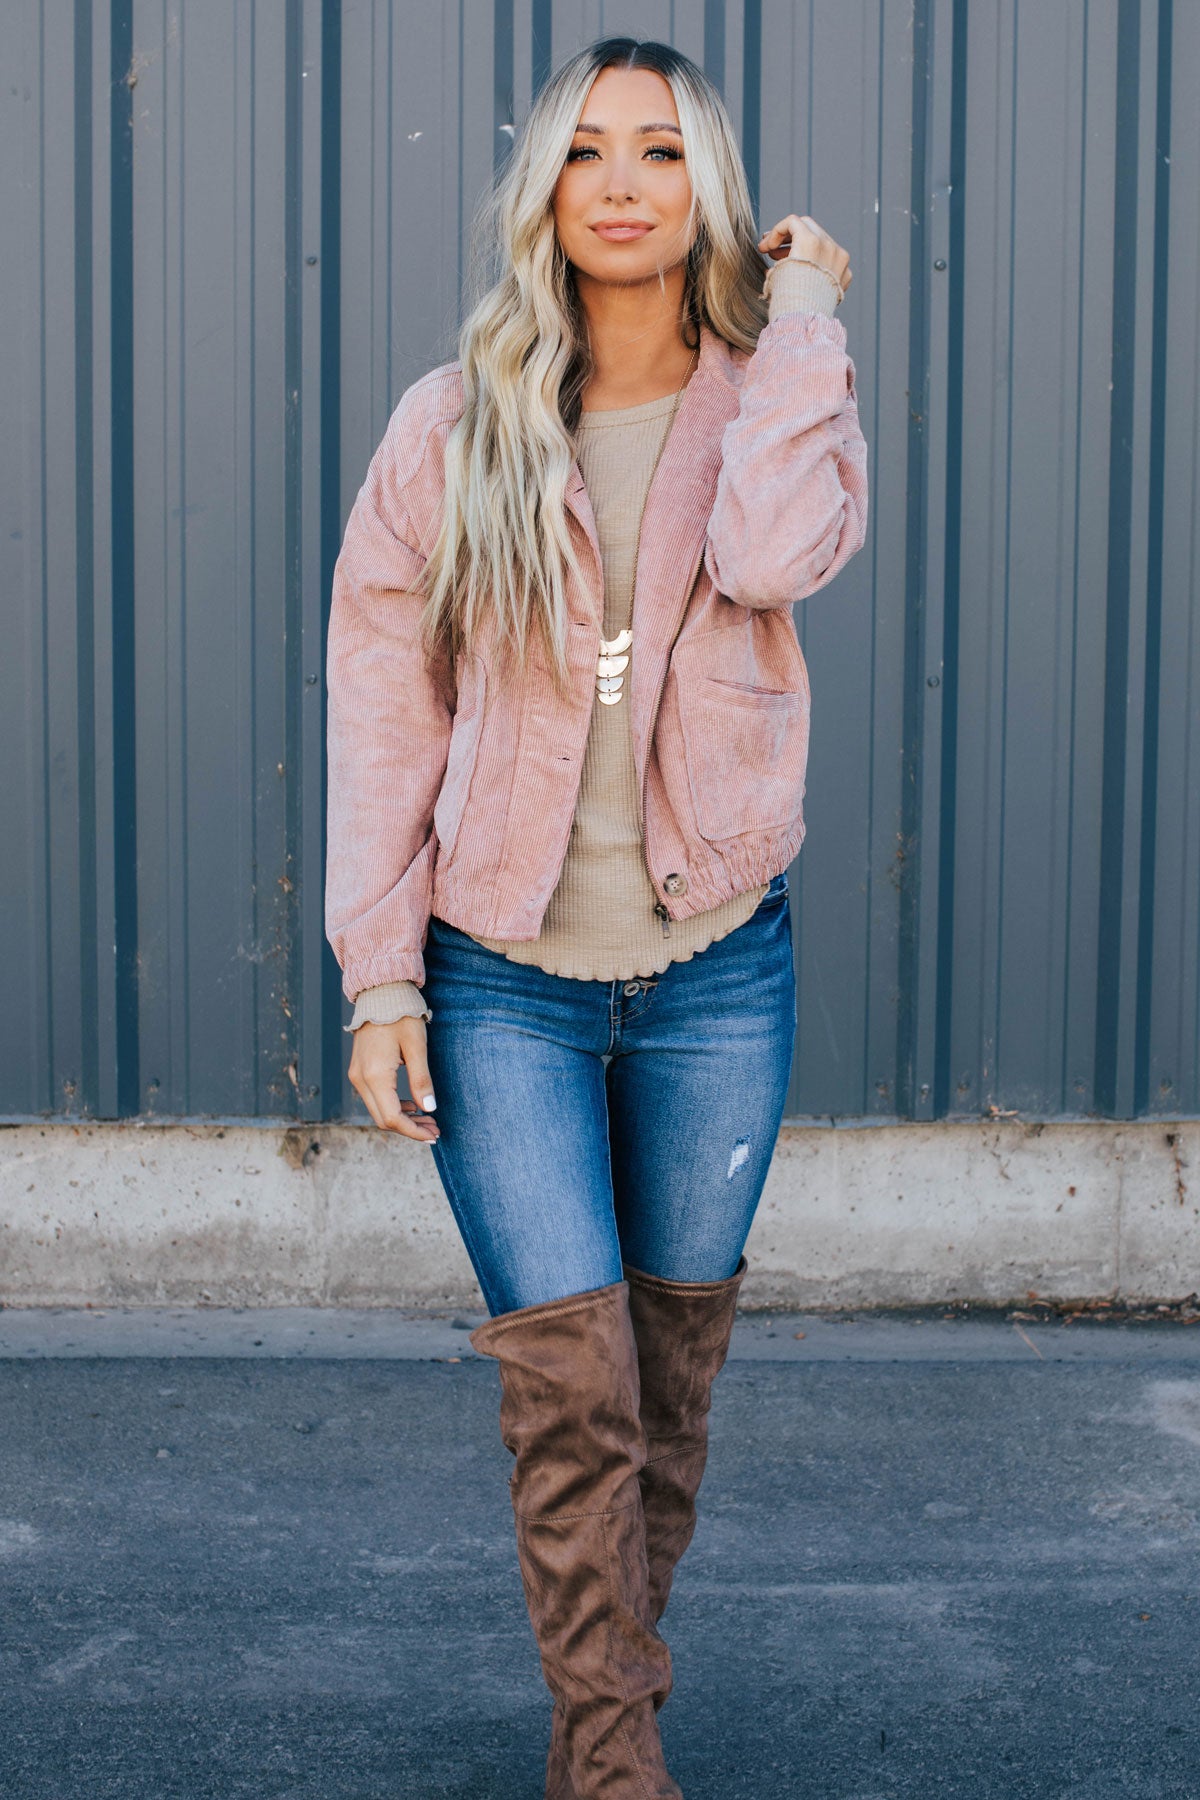 Ribbed Pink Jacket for Fall